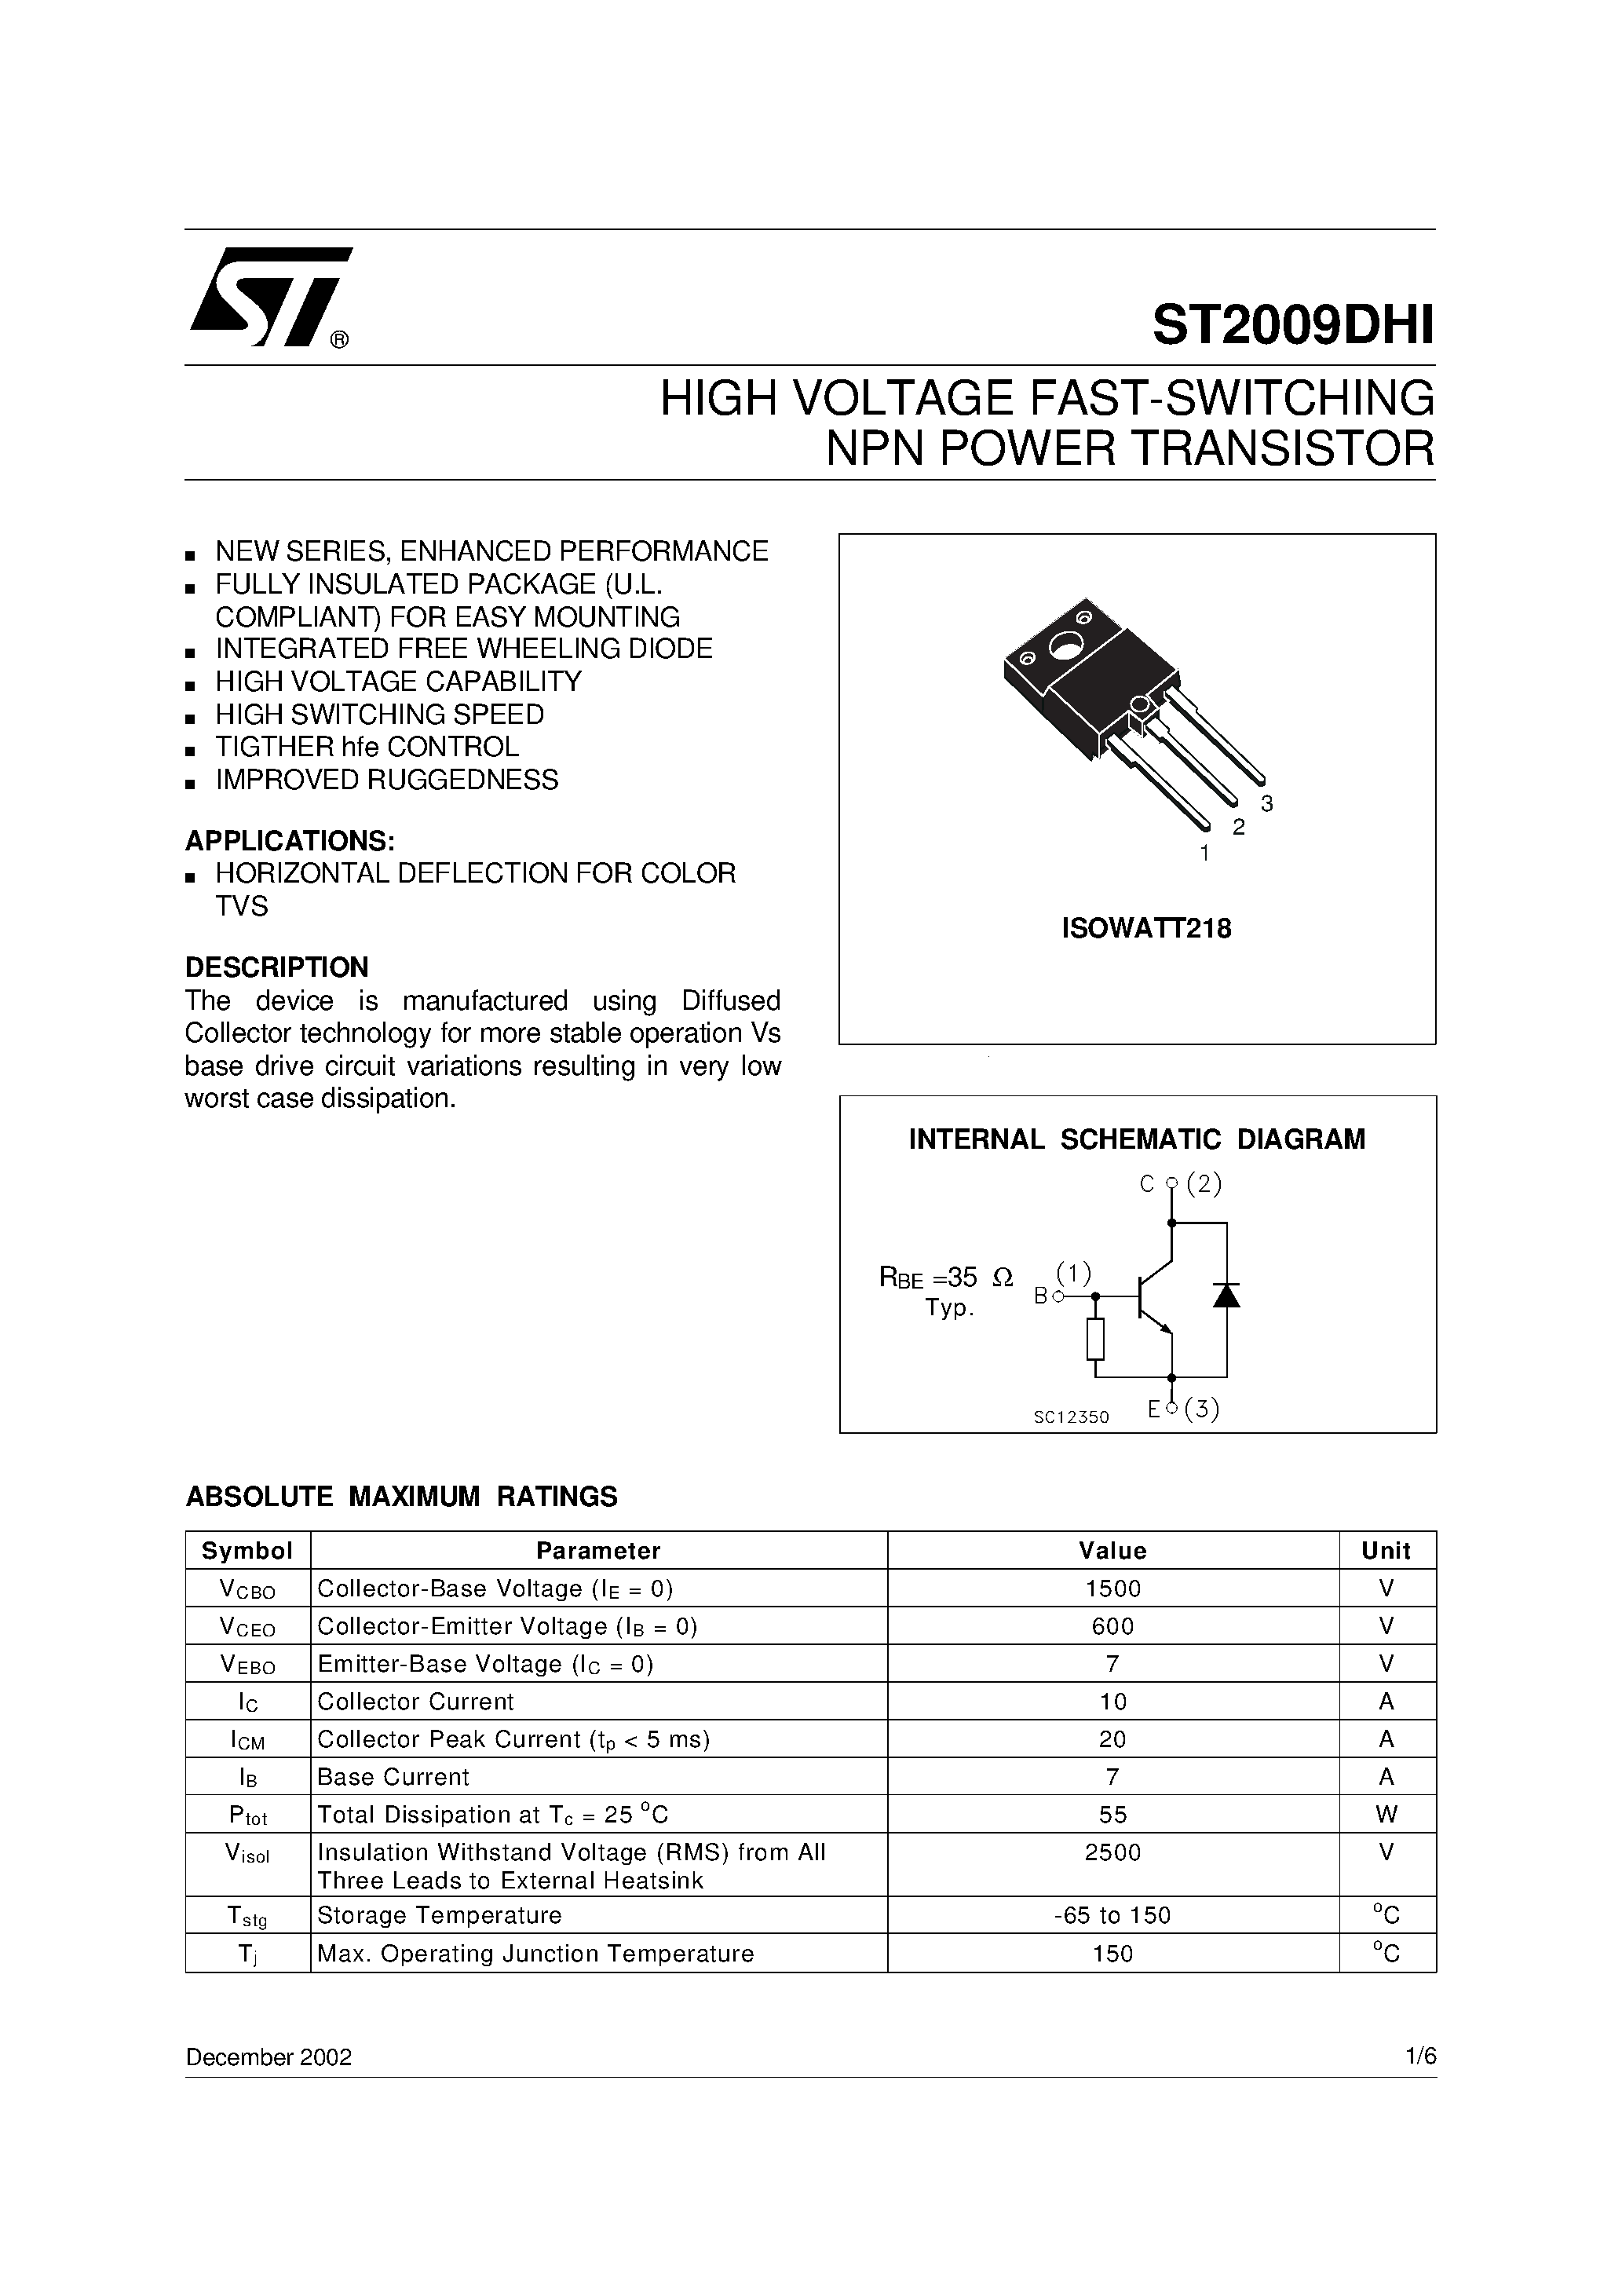 Даташит ST2009DHI - HIGH VOLTAGE FAST-SWITCHING NPN POWER TRANSISTOR страница 1